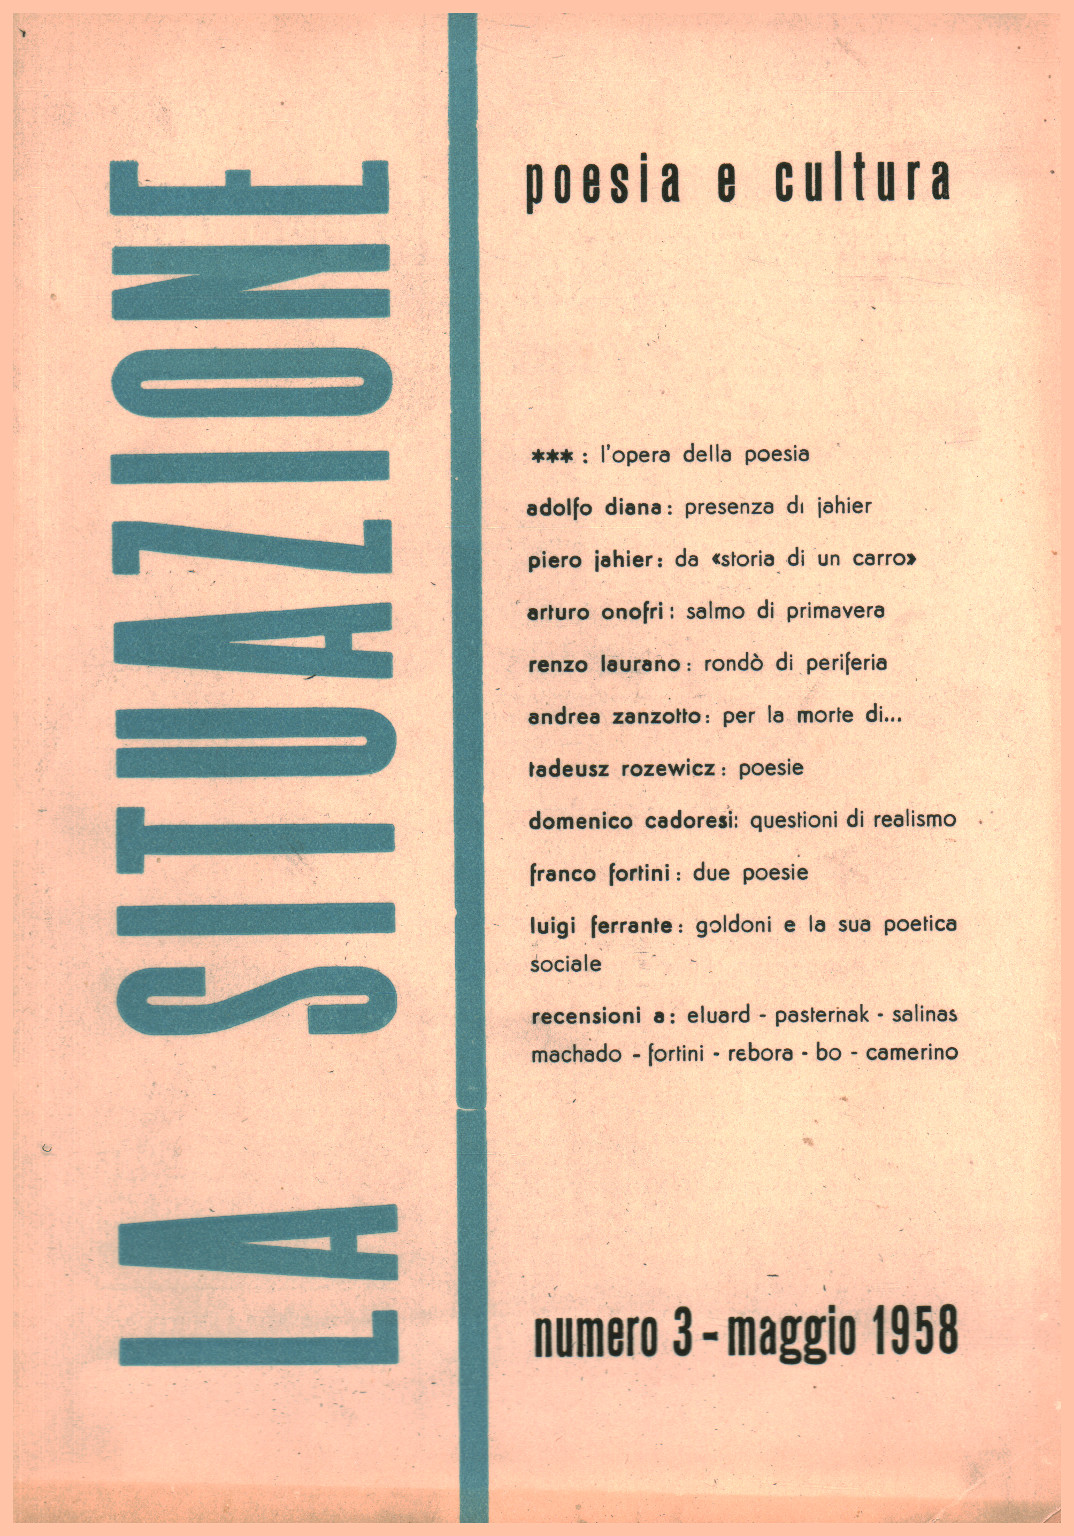 The situation no. 3, may 1958, s.a.